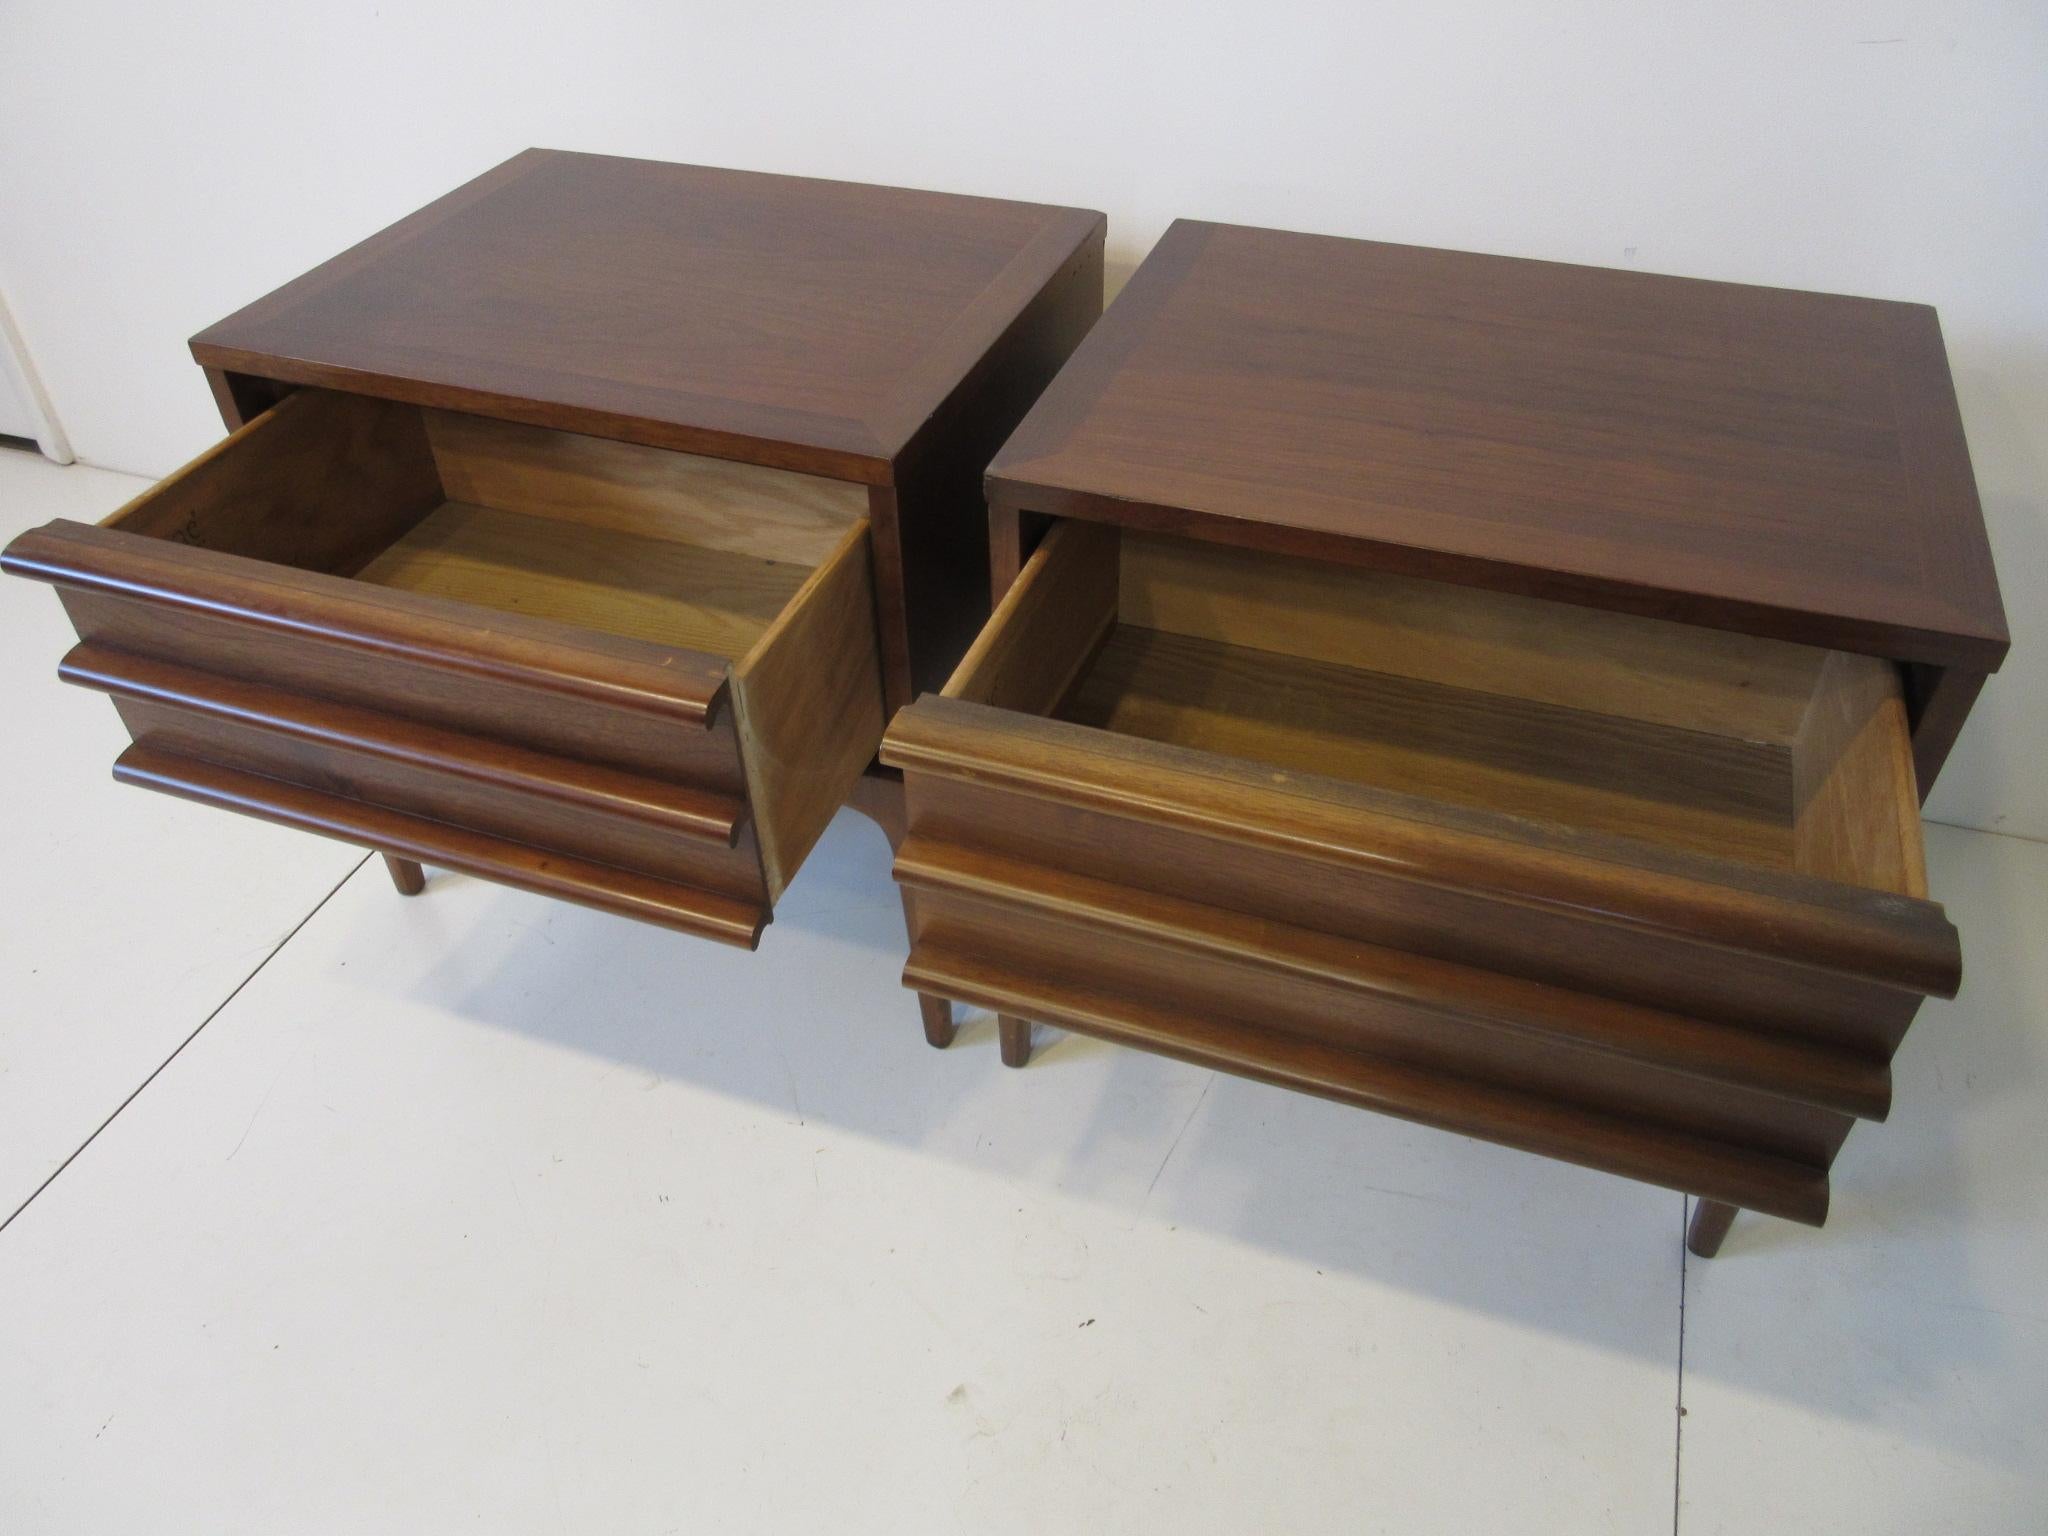 A pair of walnut Minimalist nightstands / end tables with drawers sitting on simple slender legs for a light feel, manufactured by the Lane Altavista Furniture company from their Rhythm collection. These nightstands can be matched with any type of